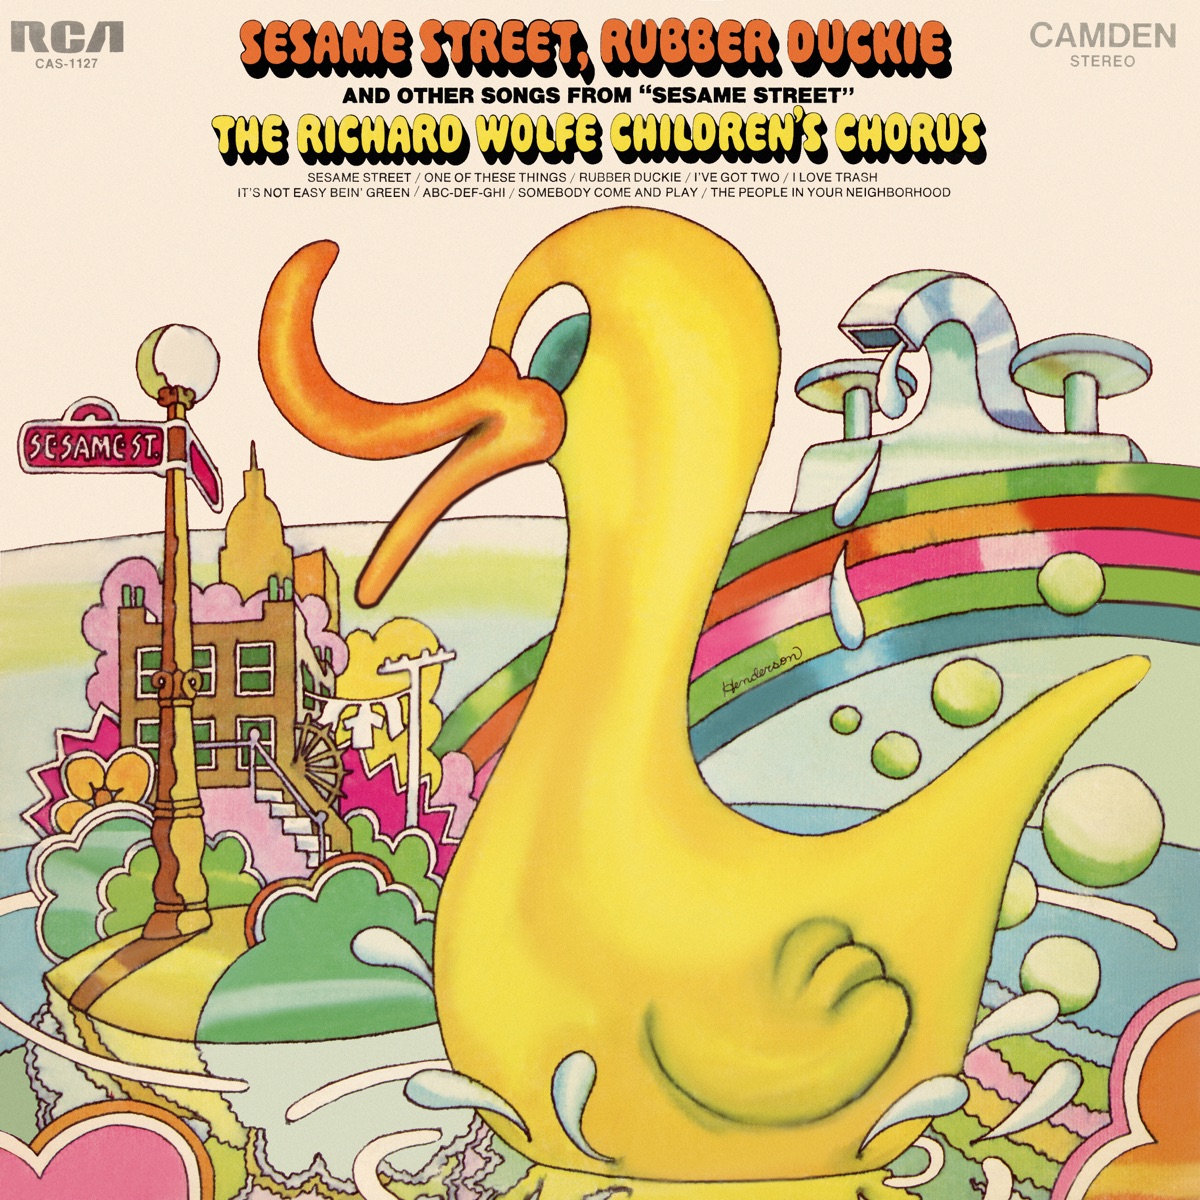 Rubber Duckie and Other Songs From Sesame Street by The Richard Wolfe  Children's Chorus on Apple Music